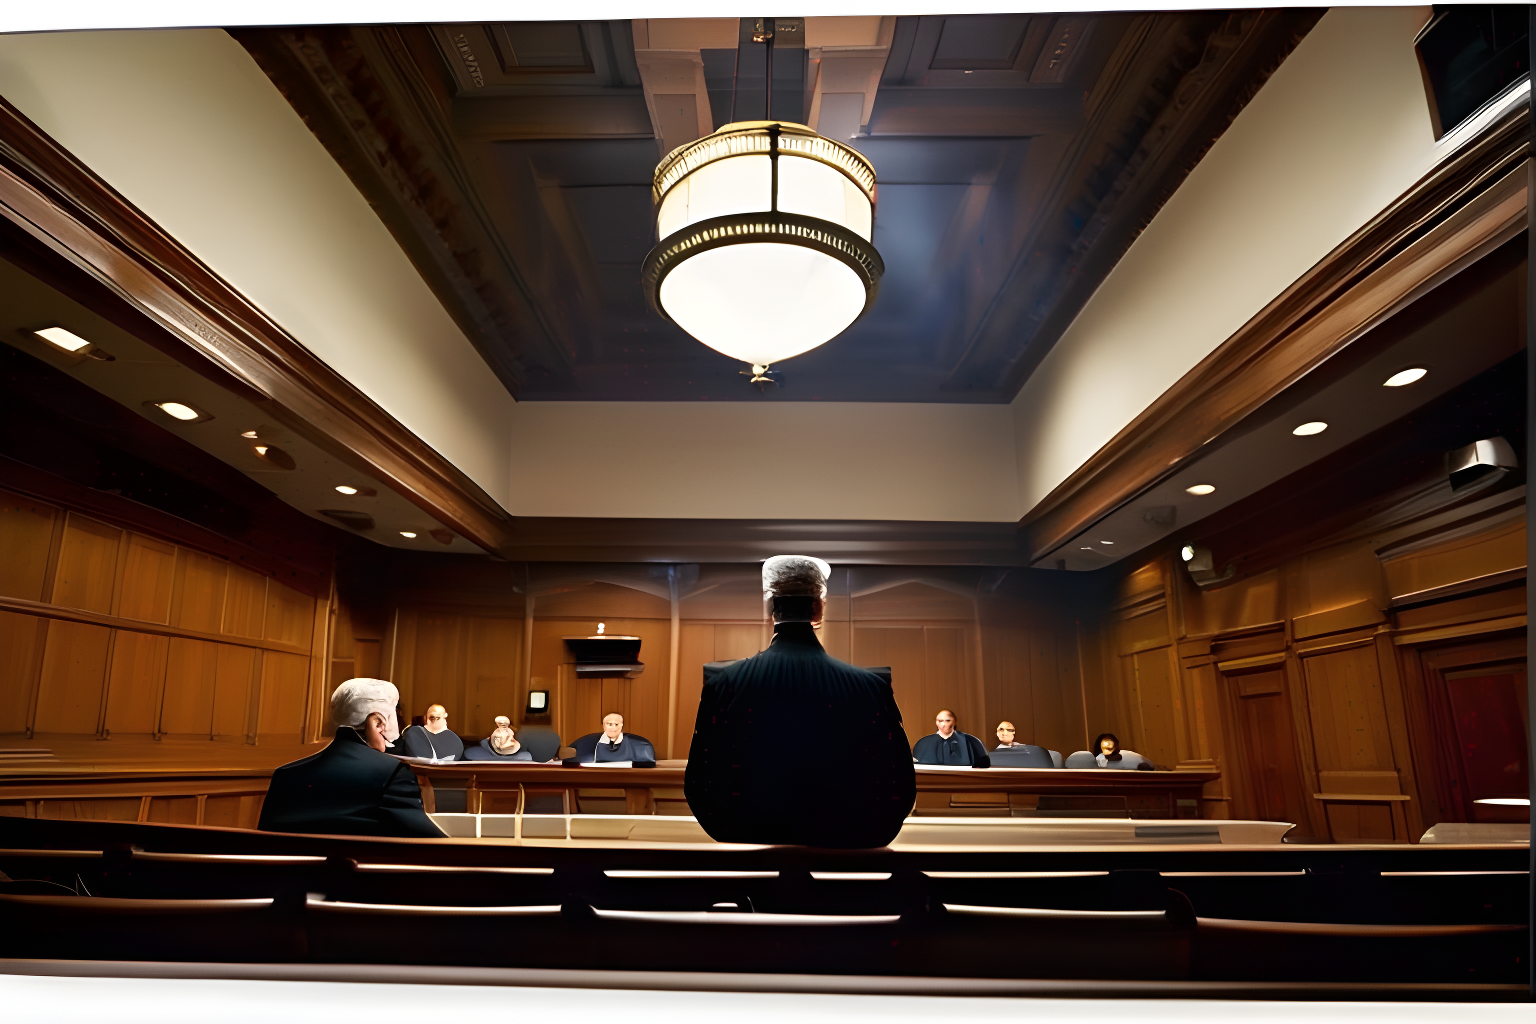 breathtaking photograph of a lawyer in a courtroom, presiding judge and jury in the background.